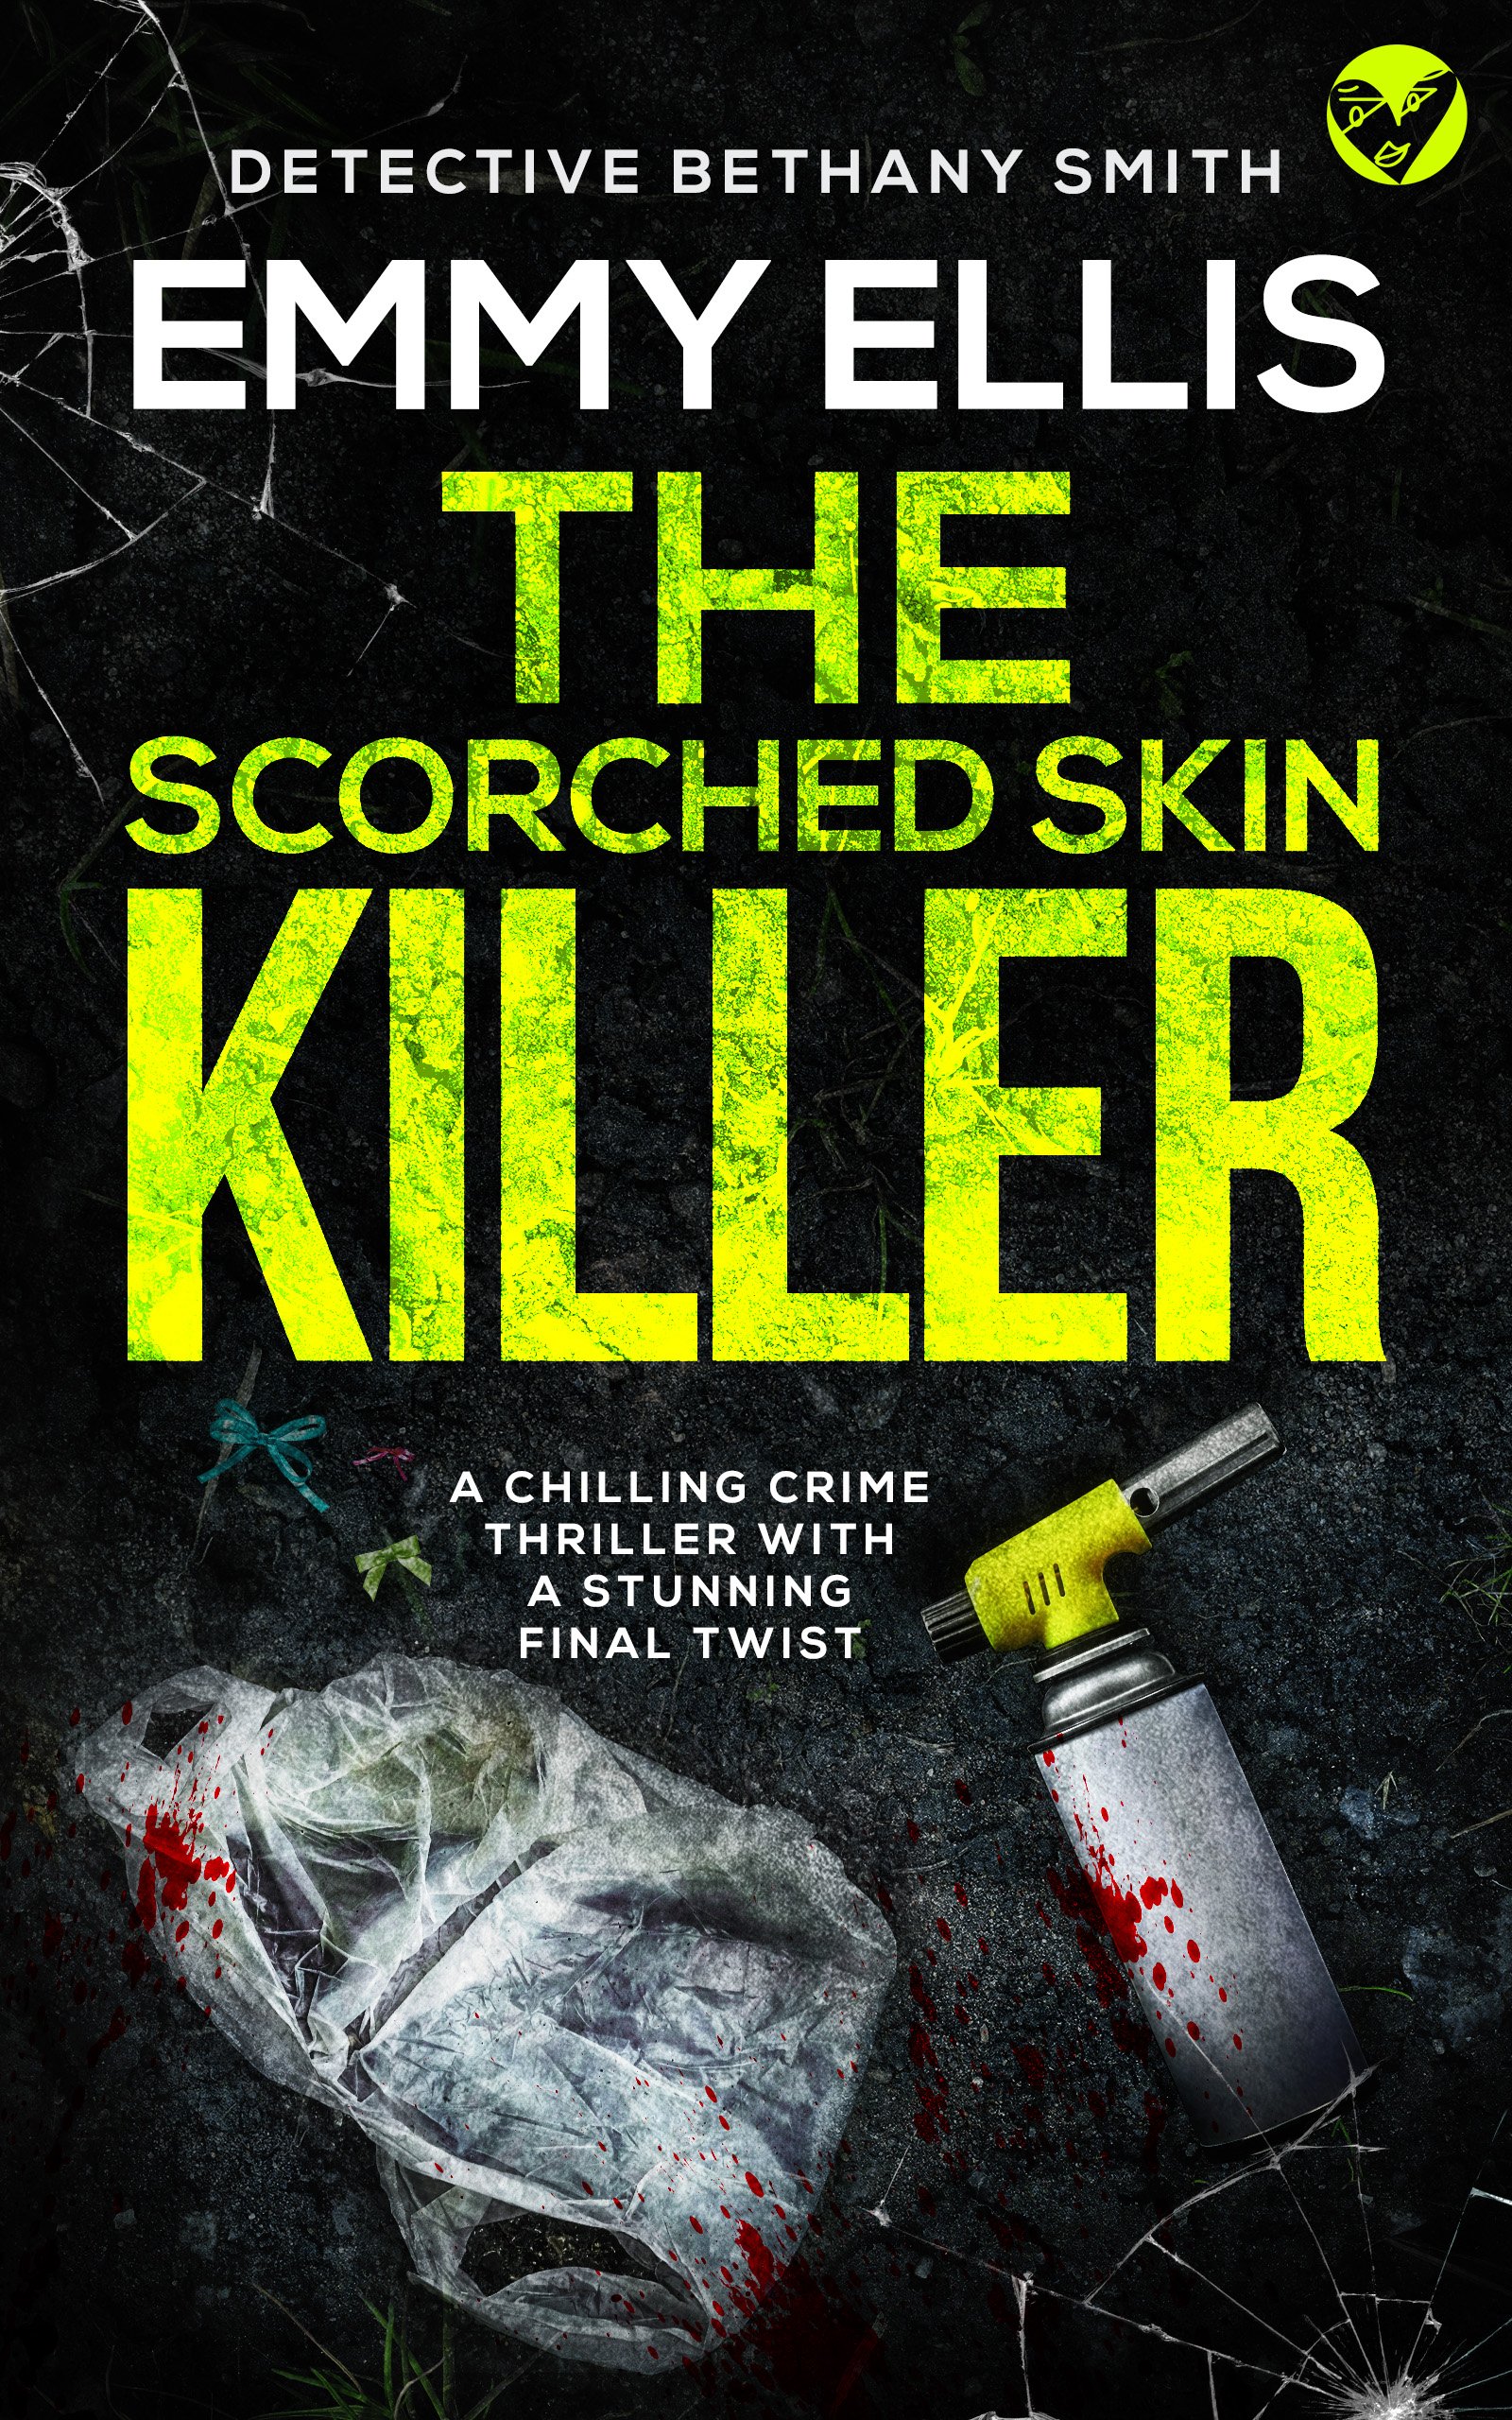 THE SCORCHED SKIN KILLER Cover publish.jpg